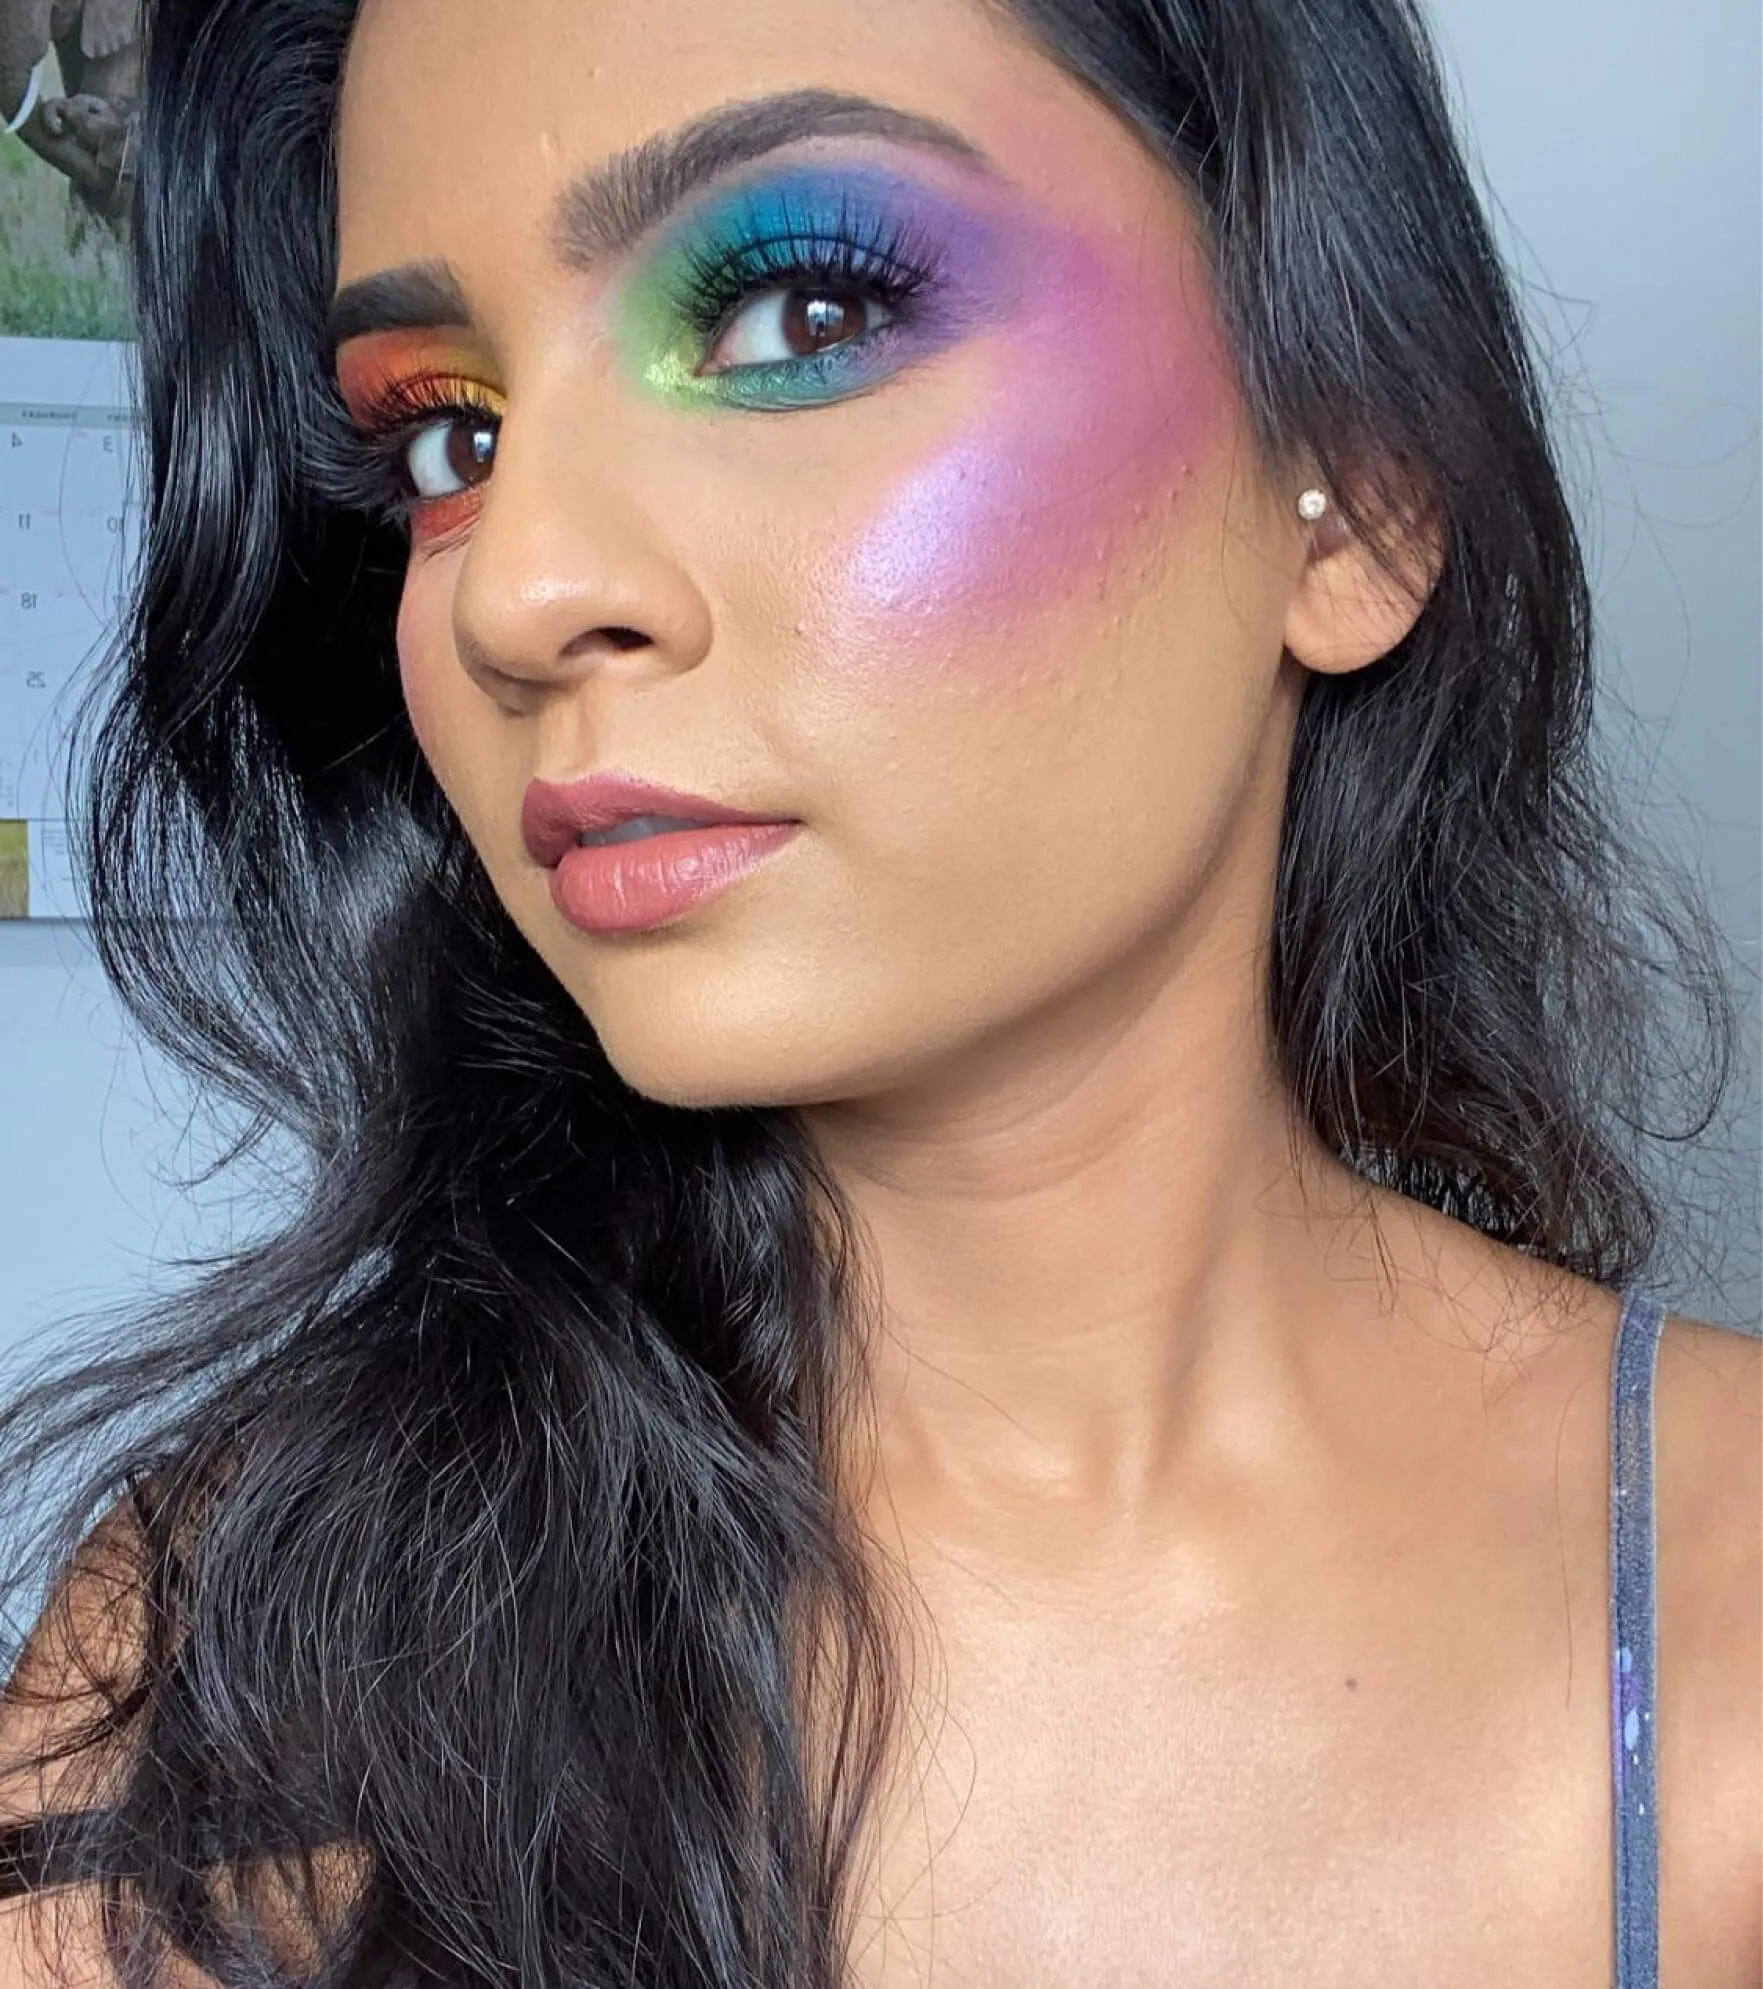 A woman with bright, rainbow colored eye makeup.